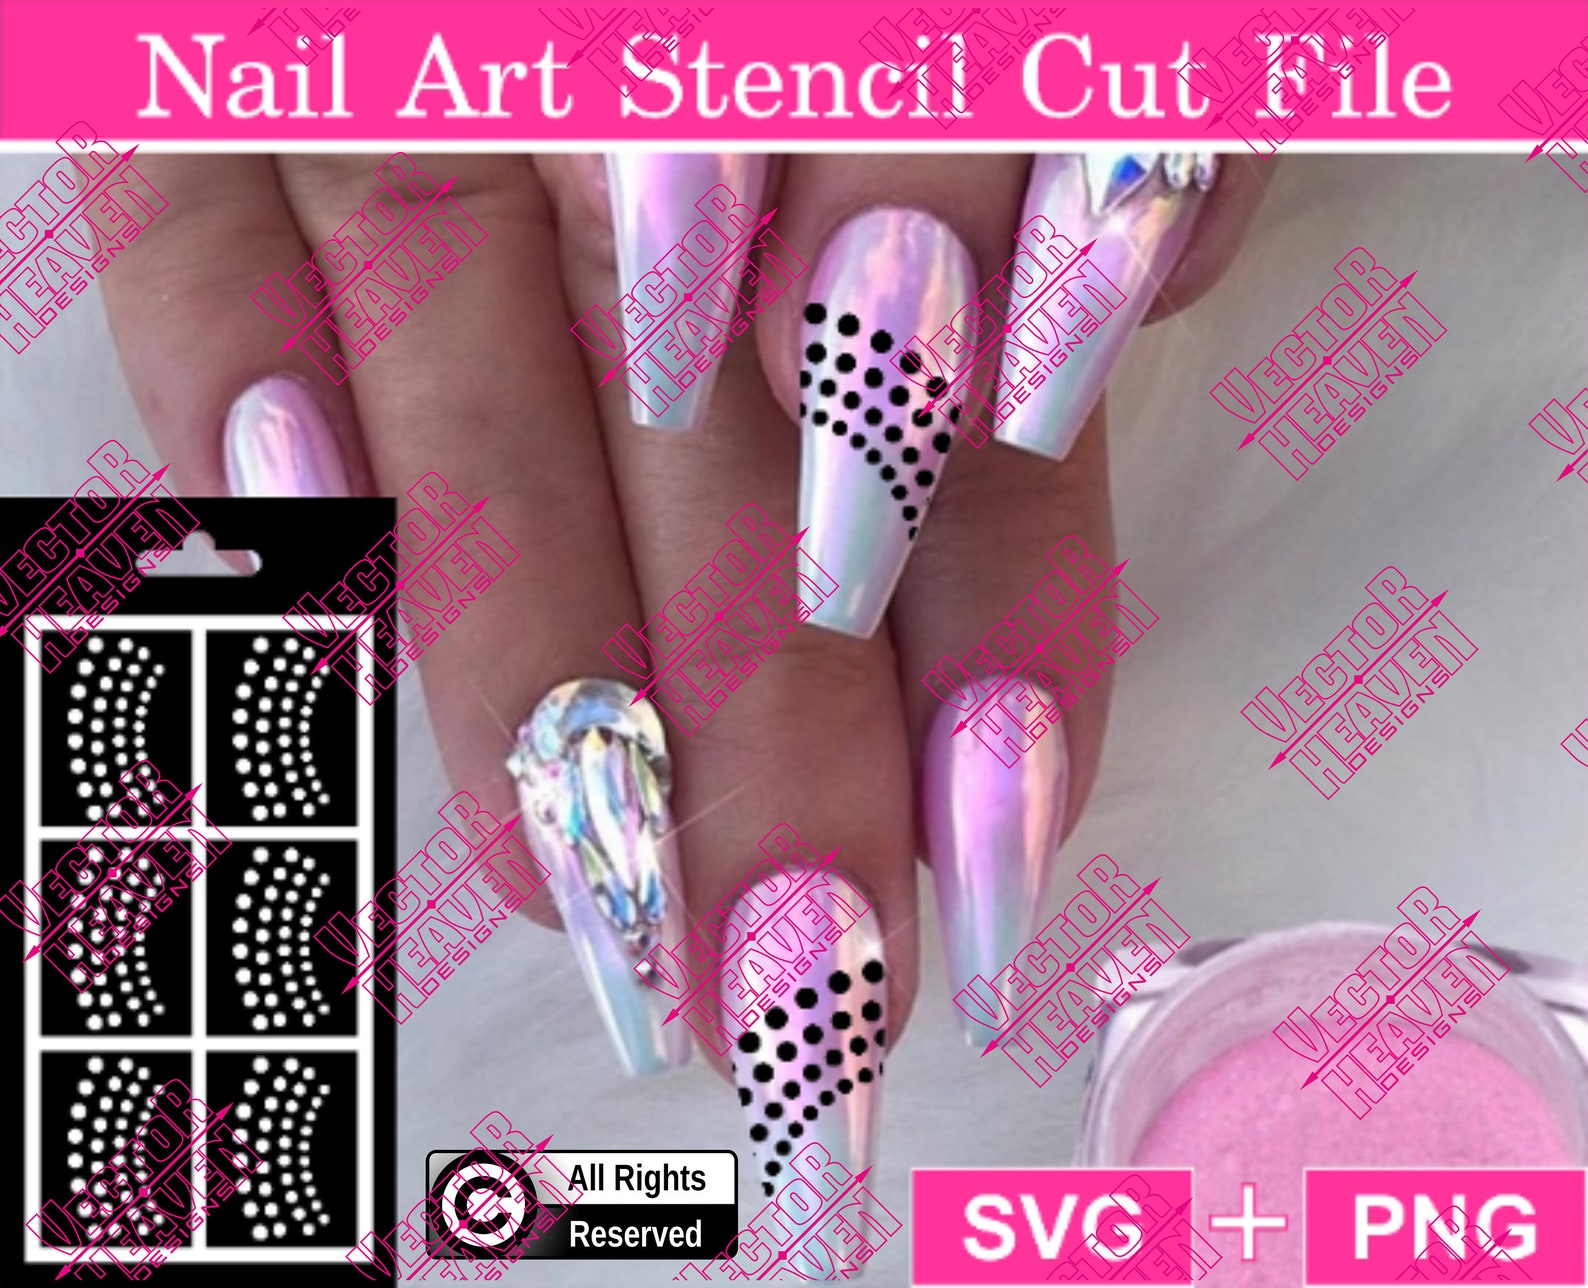 4. Nail Art Stencil Kit with 10 Colors - wide 4